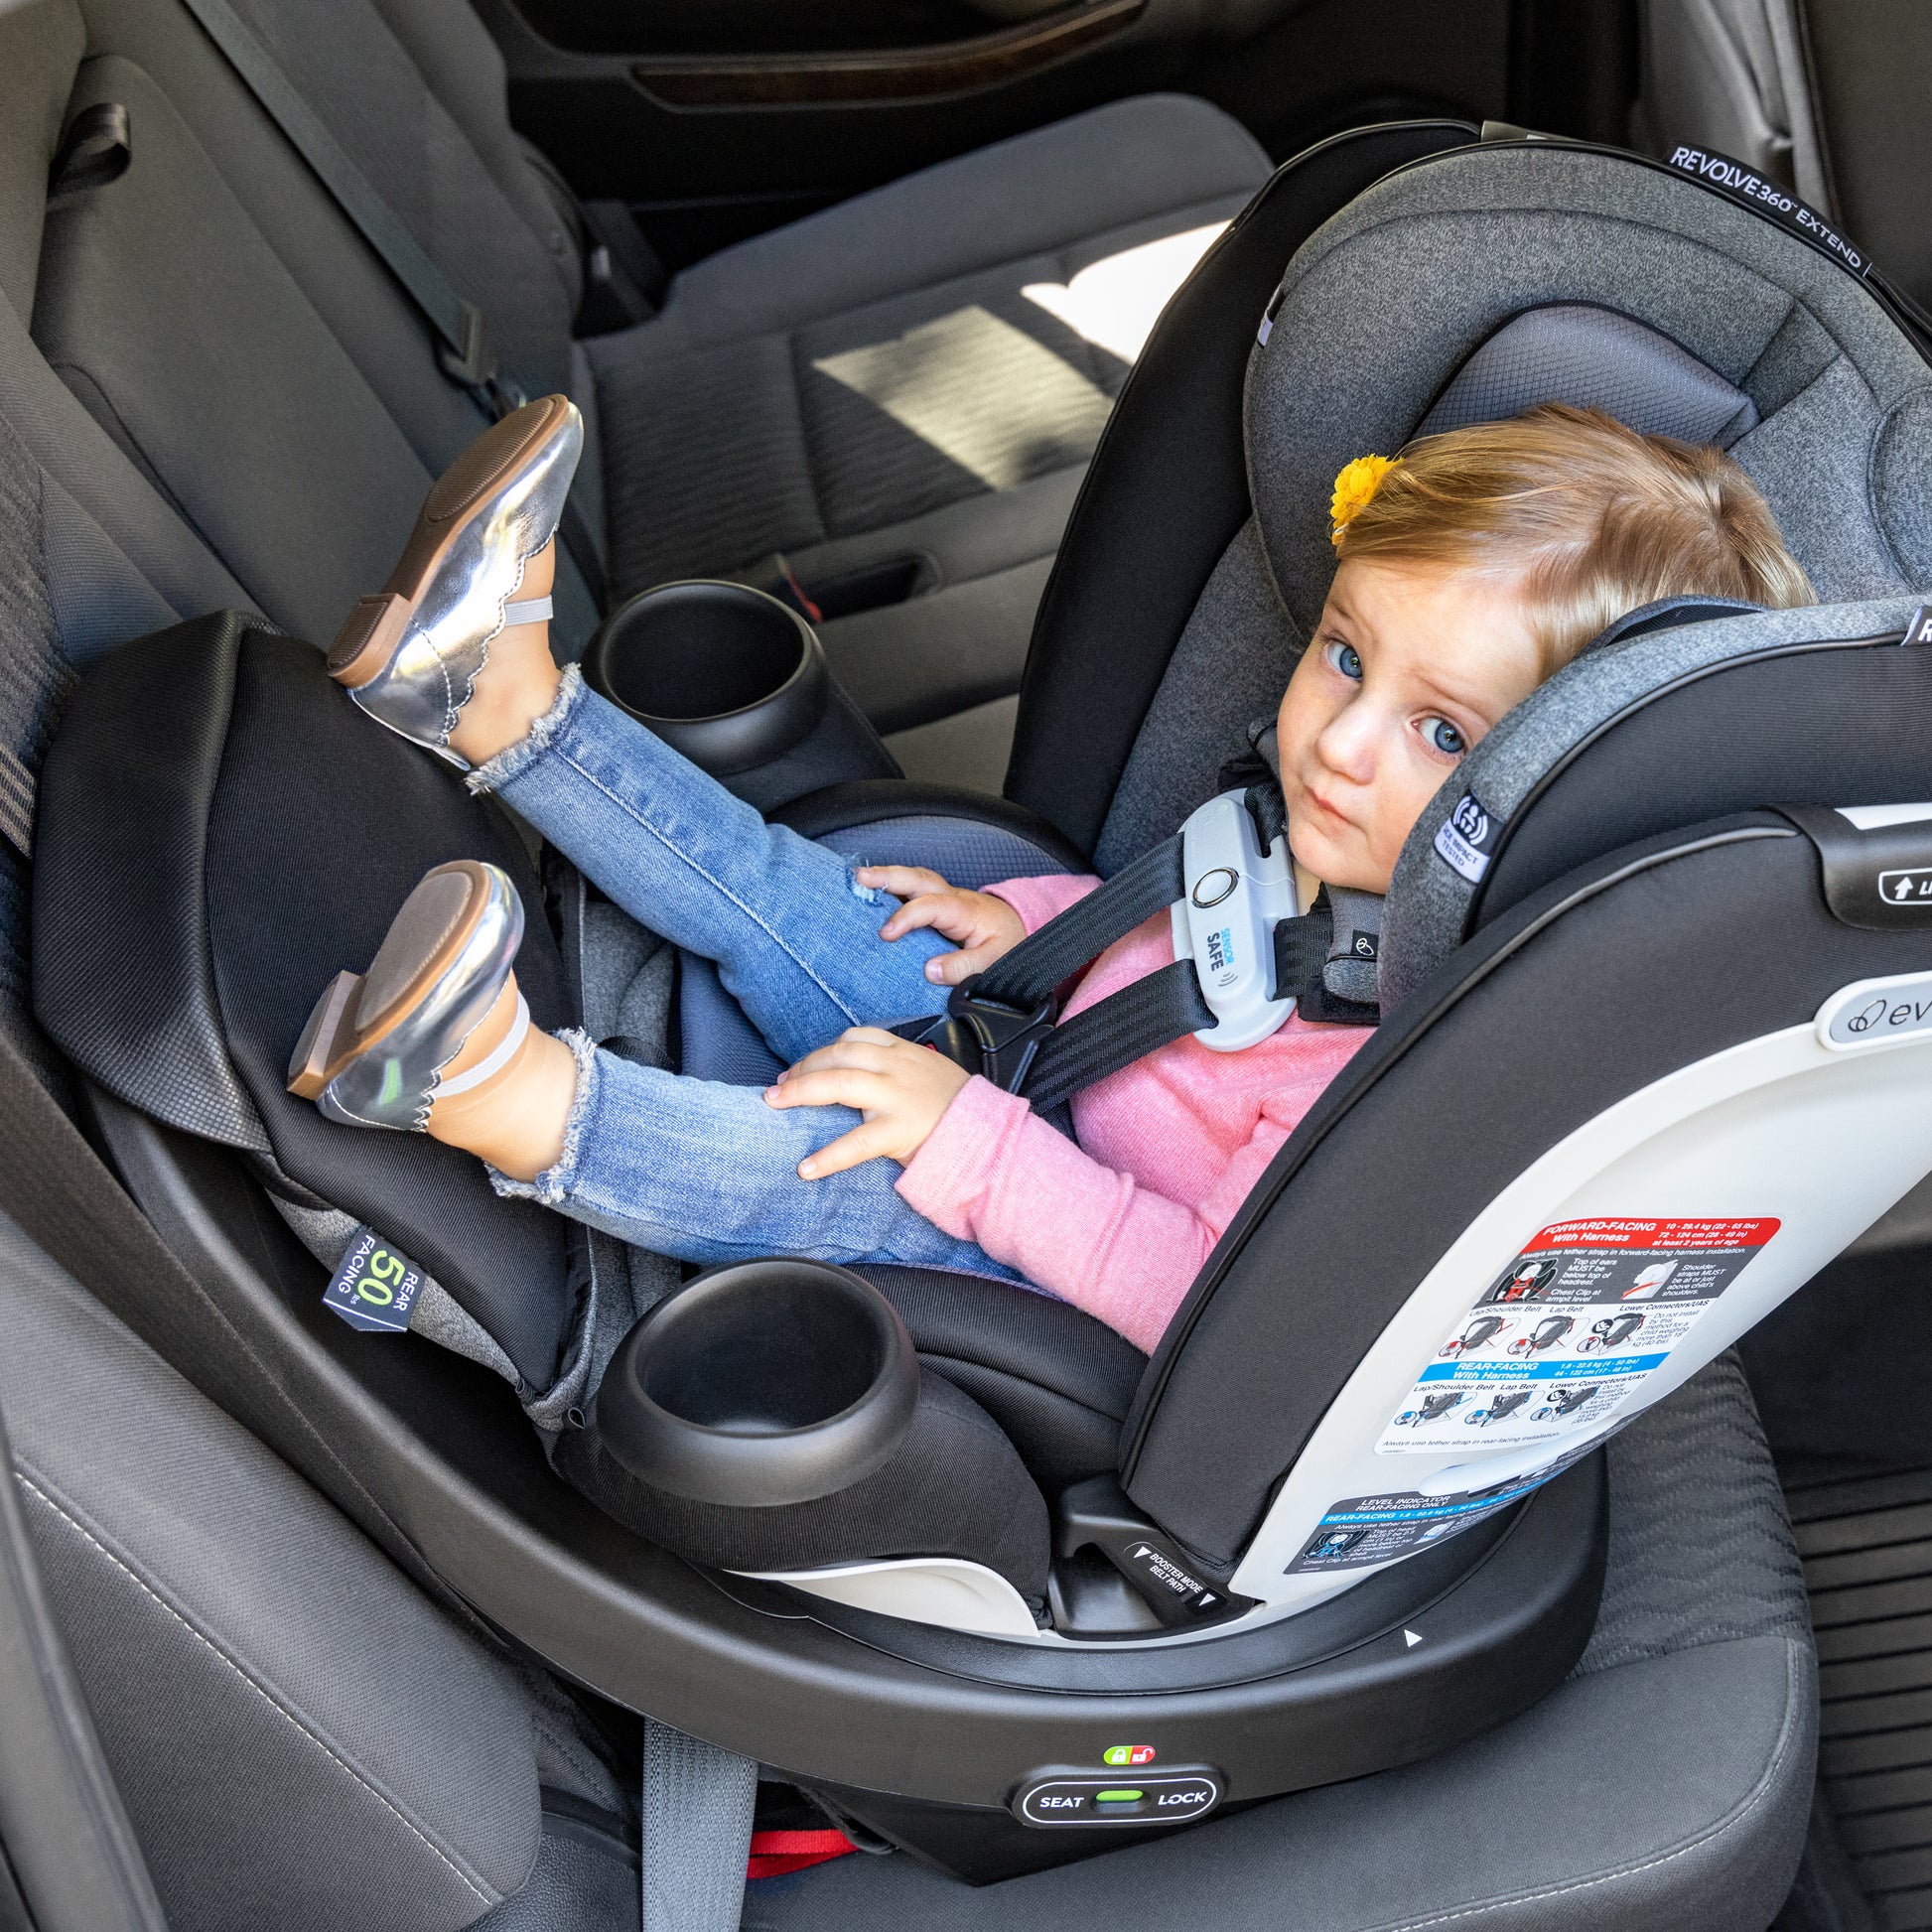 360 car seats that swivel for babies and toddlers - Which?